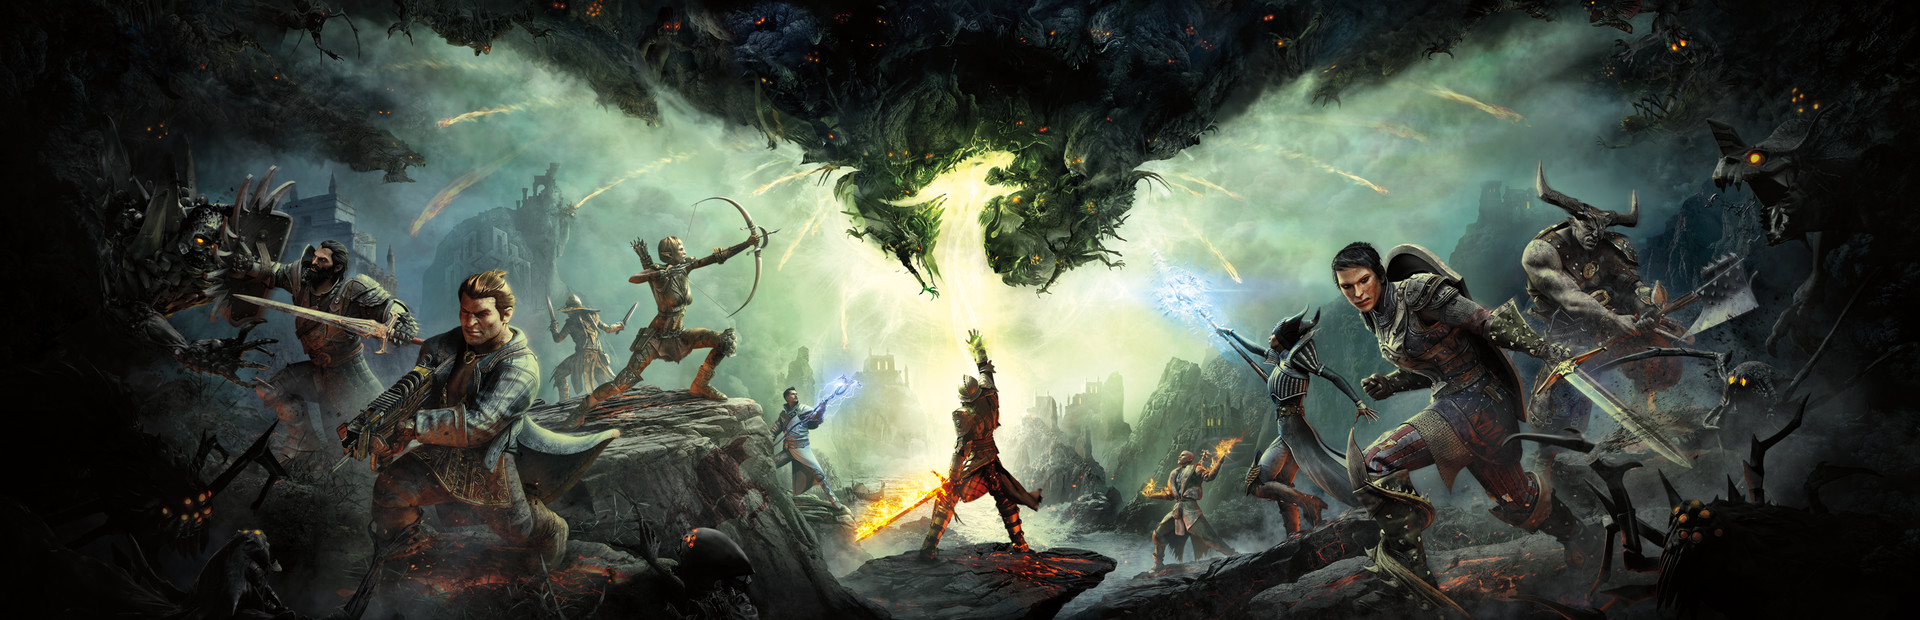 Dragon Age™ Inquisition cover image